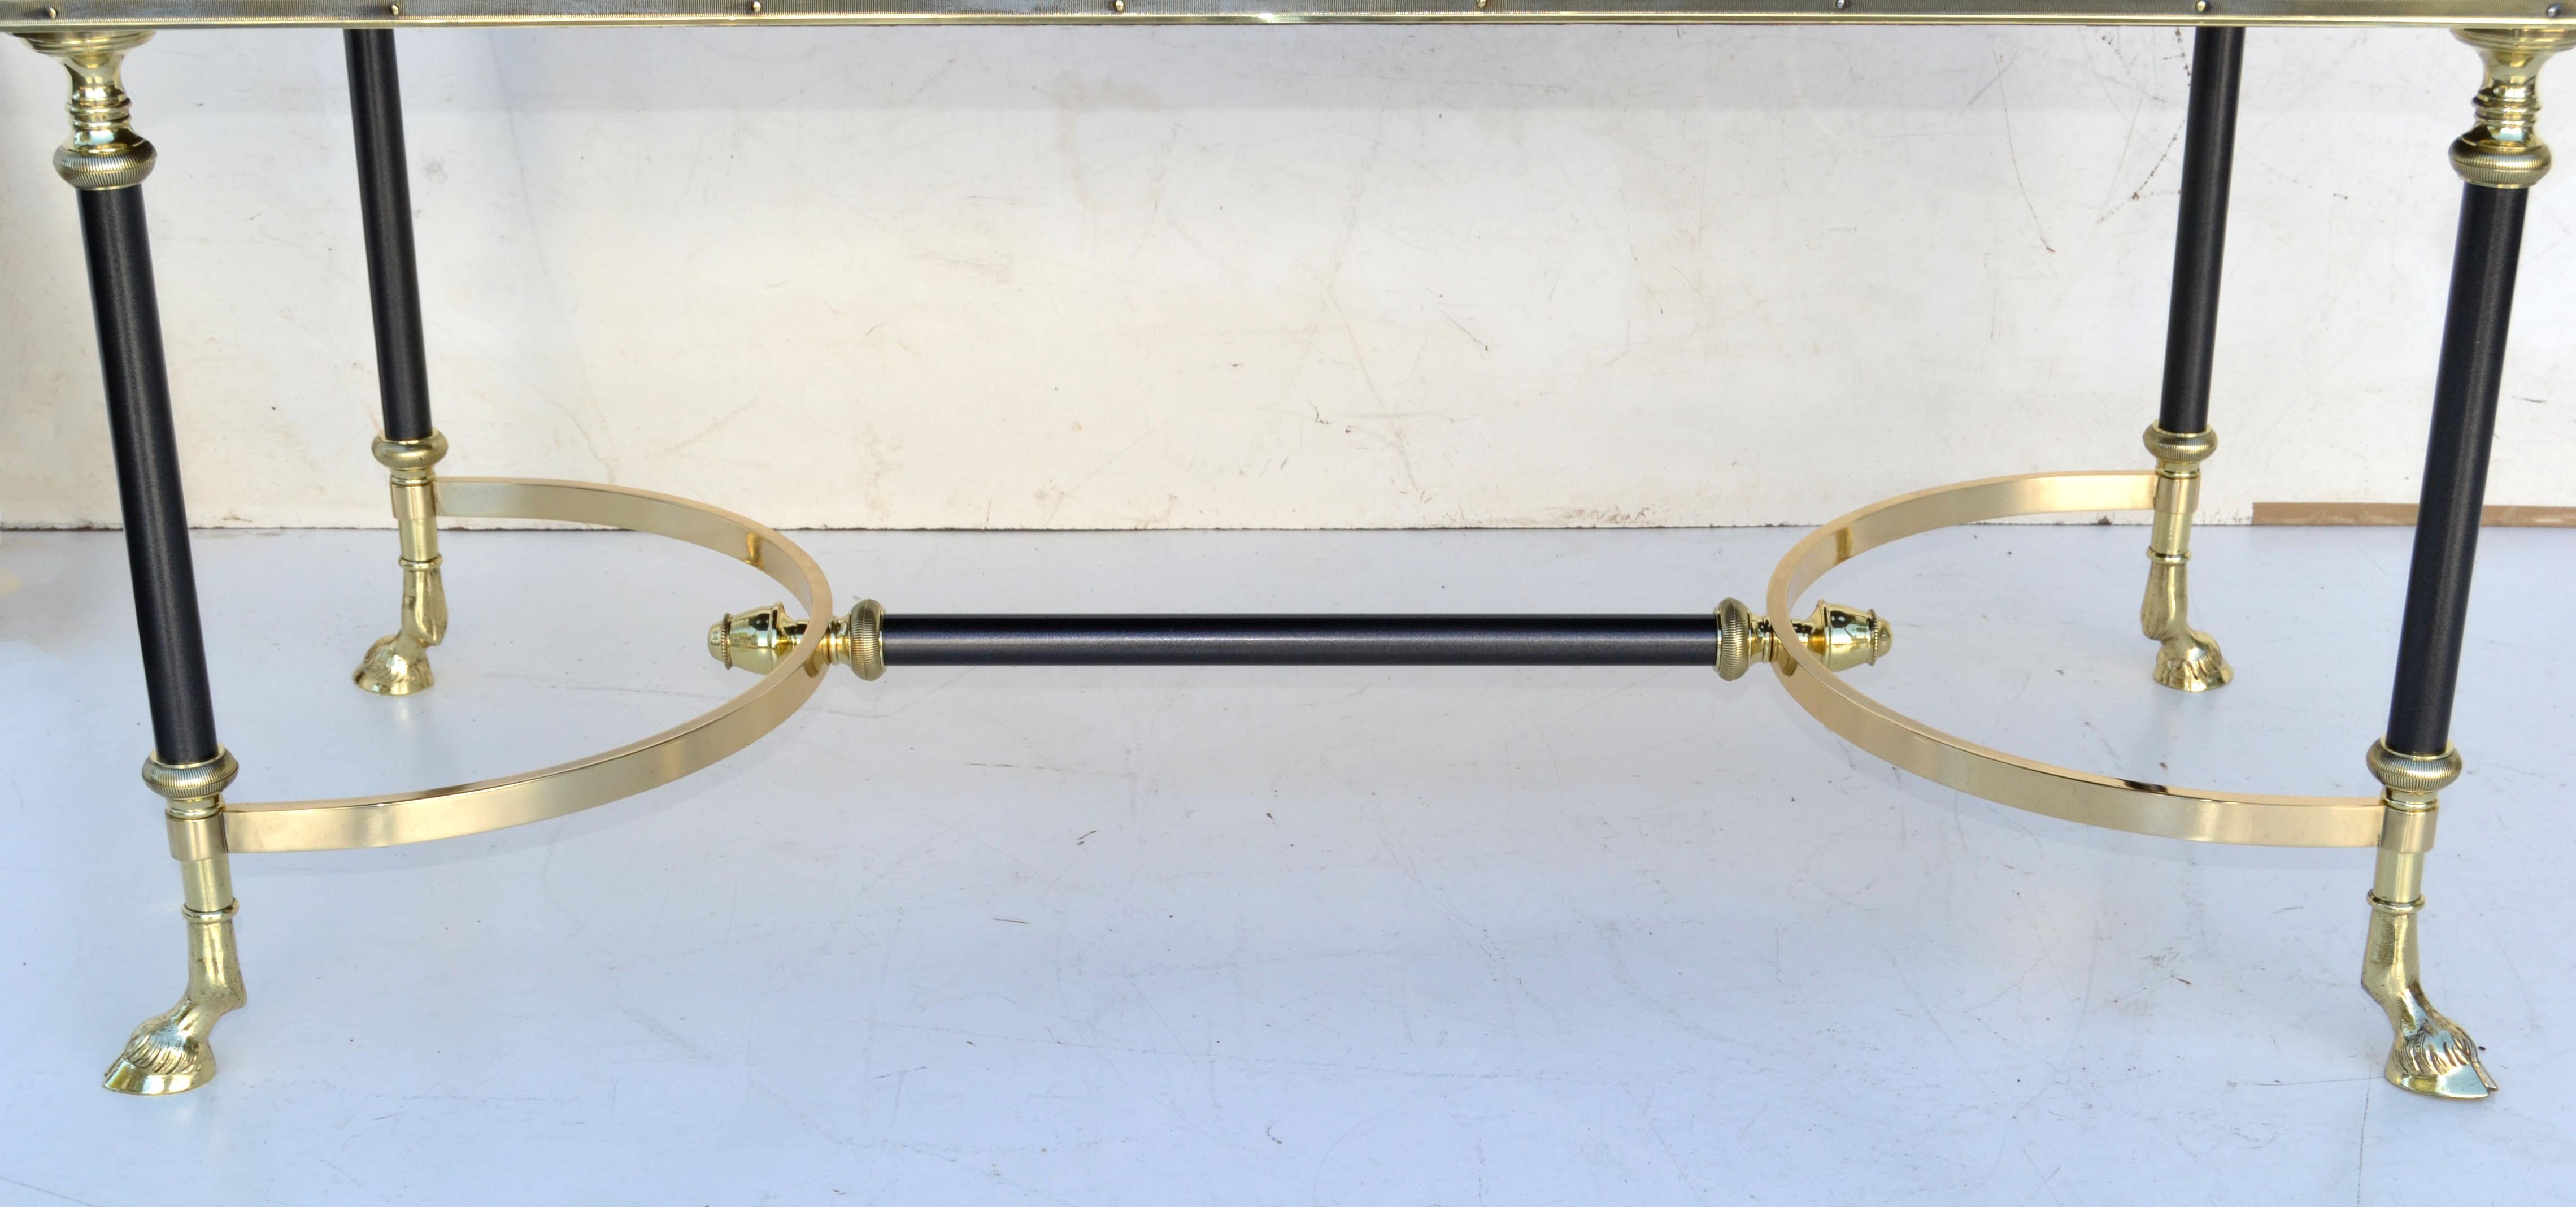 Maison Charles Polished Brass, Steel & Marble Coffee Table France 1950 For Sale 4